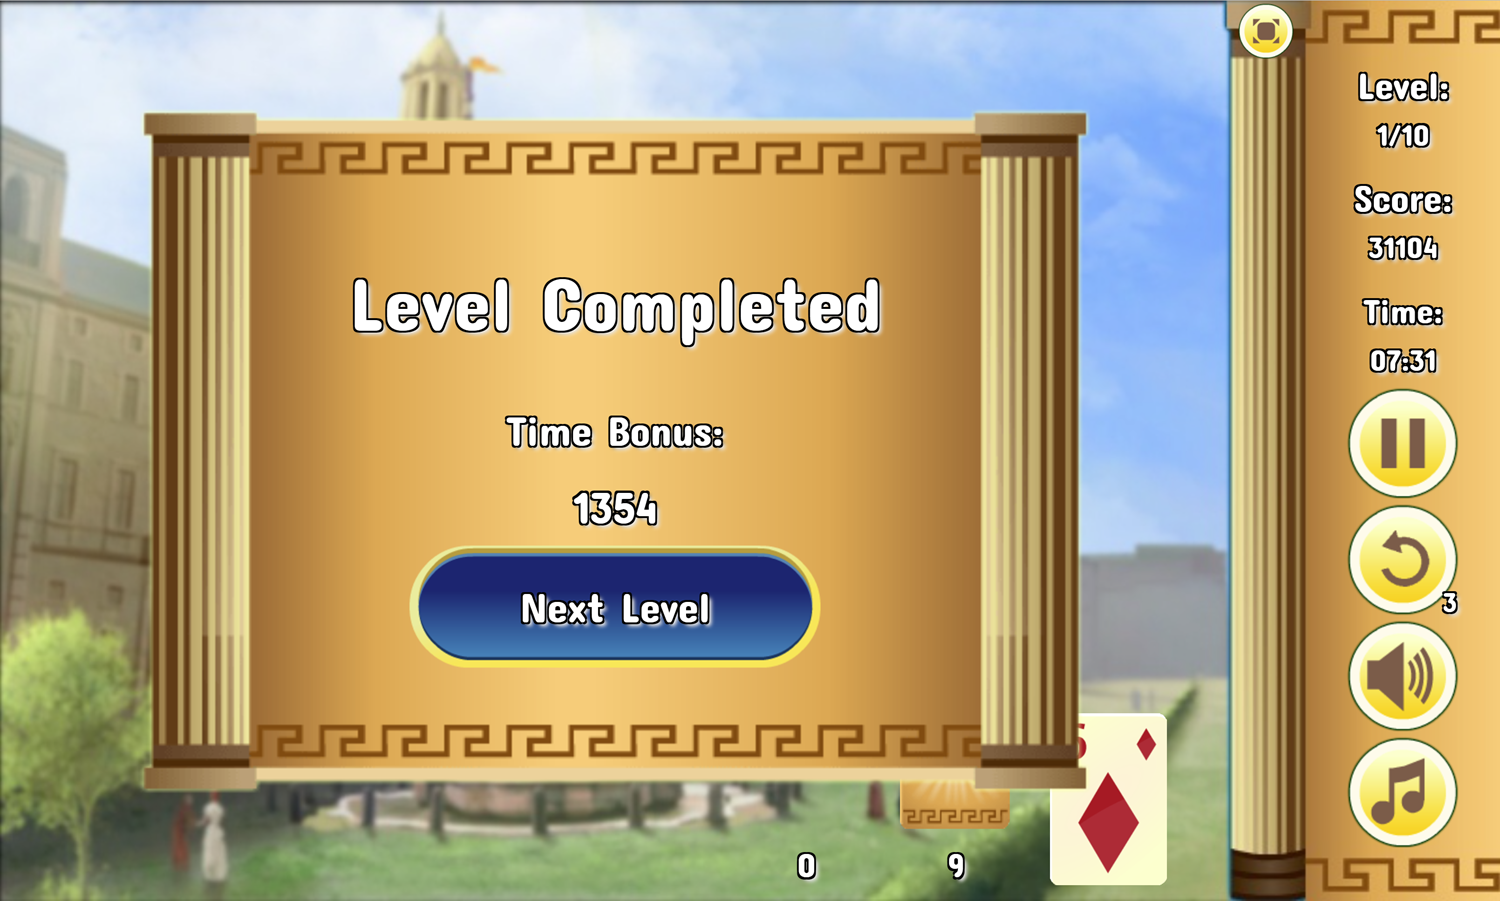 Ancient Rome Solitaire Game Level Completed Screen Screenshot.